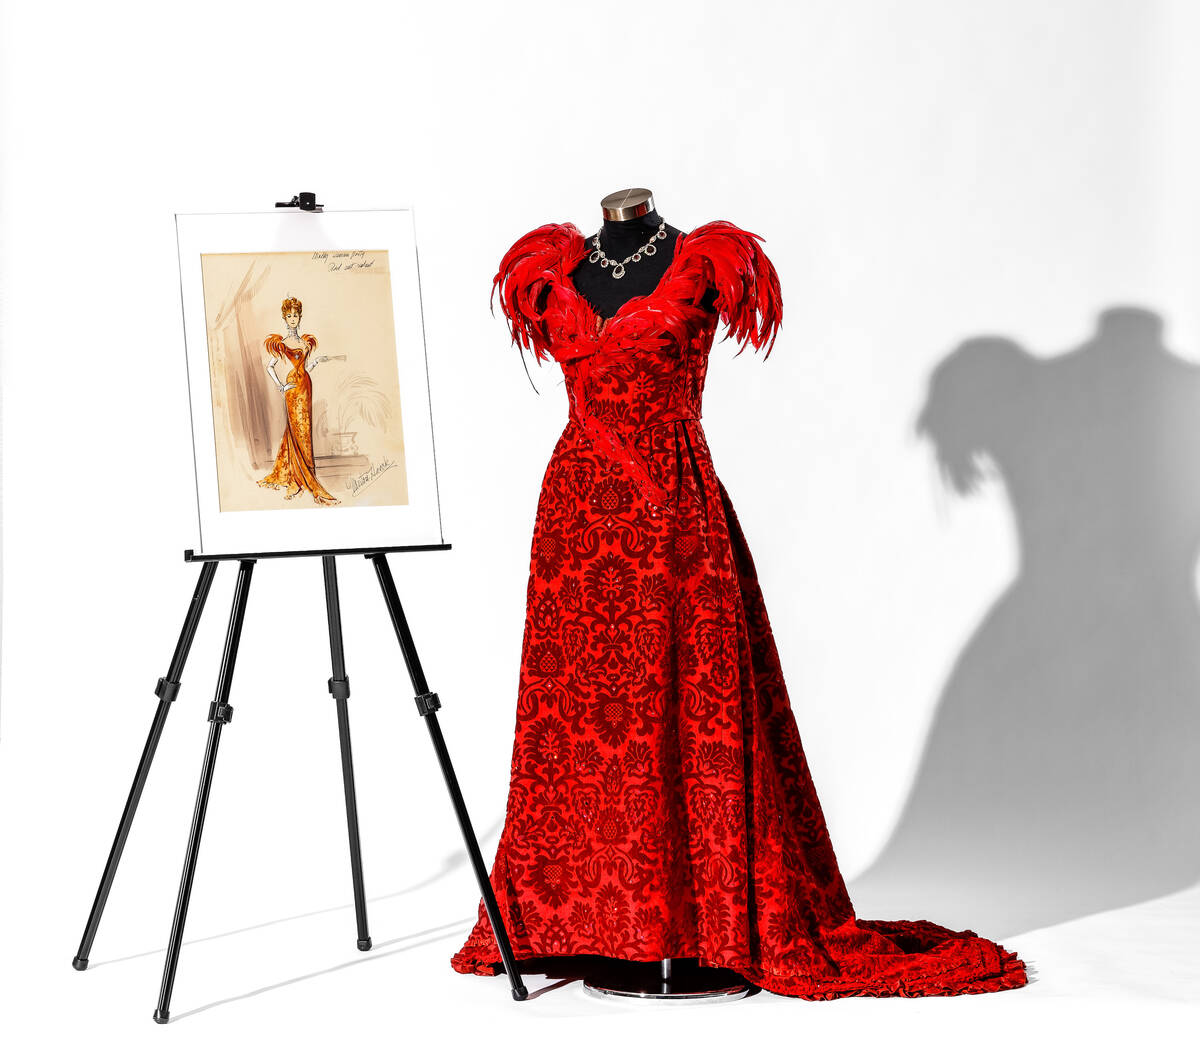 Items from Debbie Reynolds' wardrobe are among The Neon Museum's new exhibition, “The Persona ...